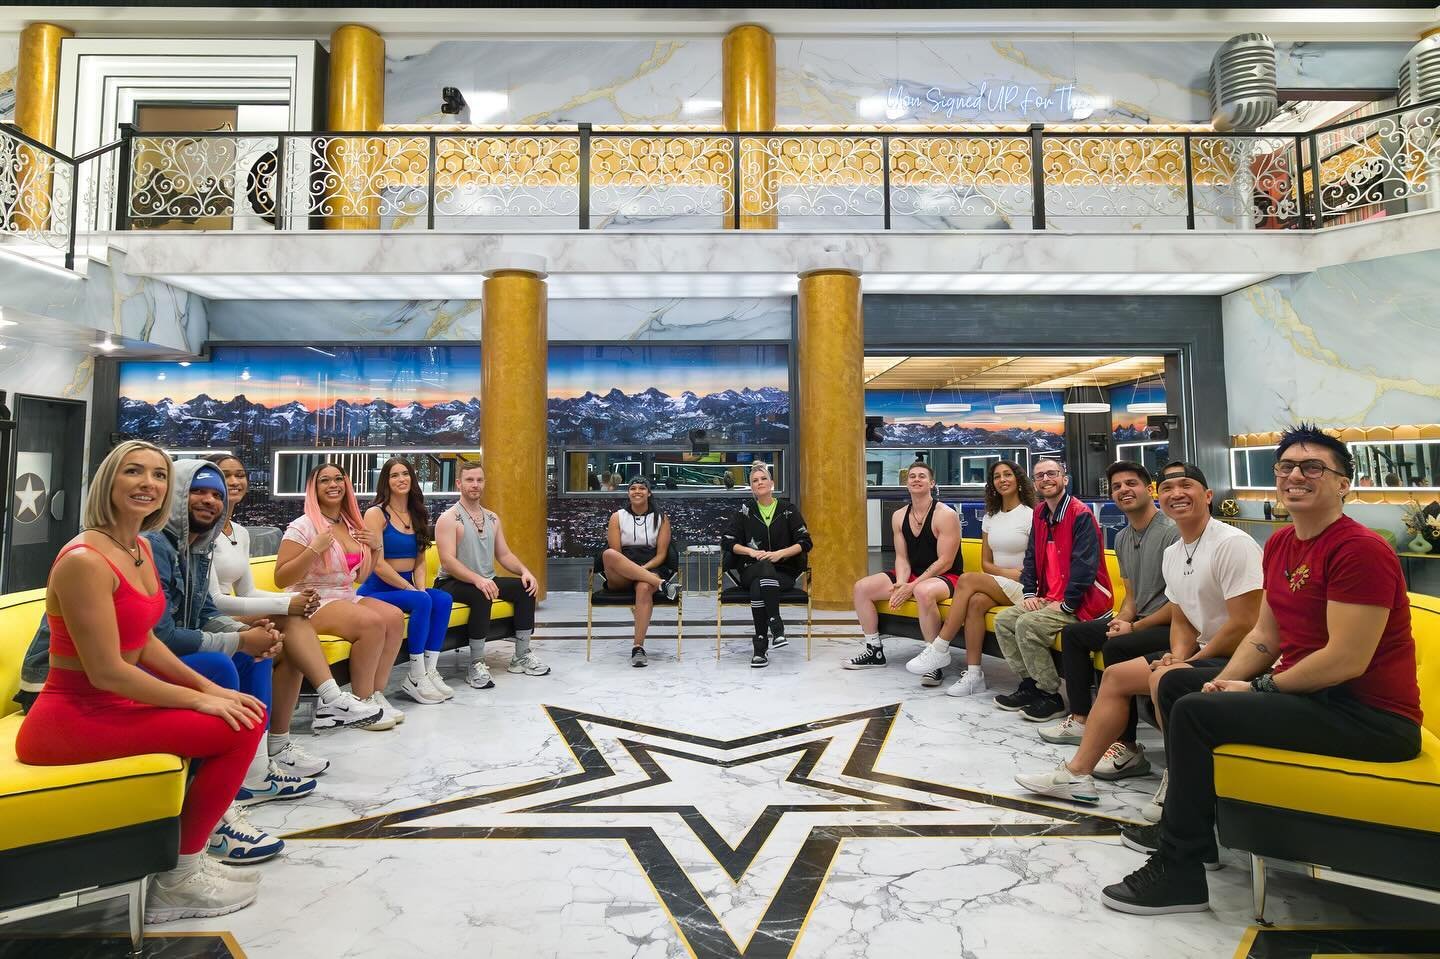 Another incredible season of Big Brother Canada is in the books! Season 12 was a show-stopping season, and one we are incredibly proud to have been part of. We were introduced to new strong&nbsp;players, jaw-dropping game moves,&nbsp;and of course, L